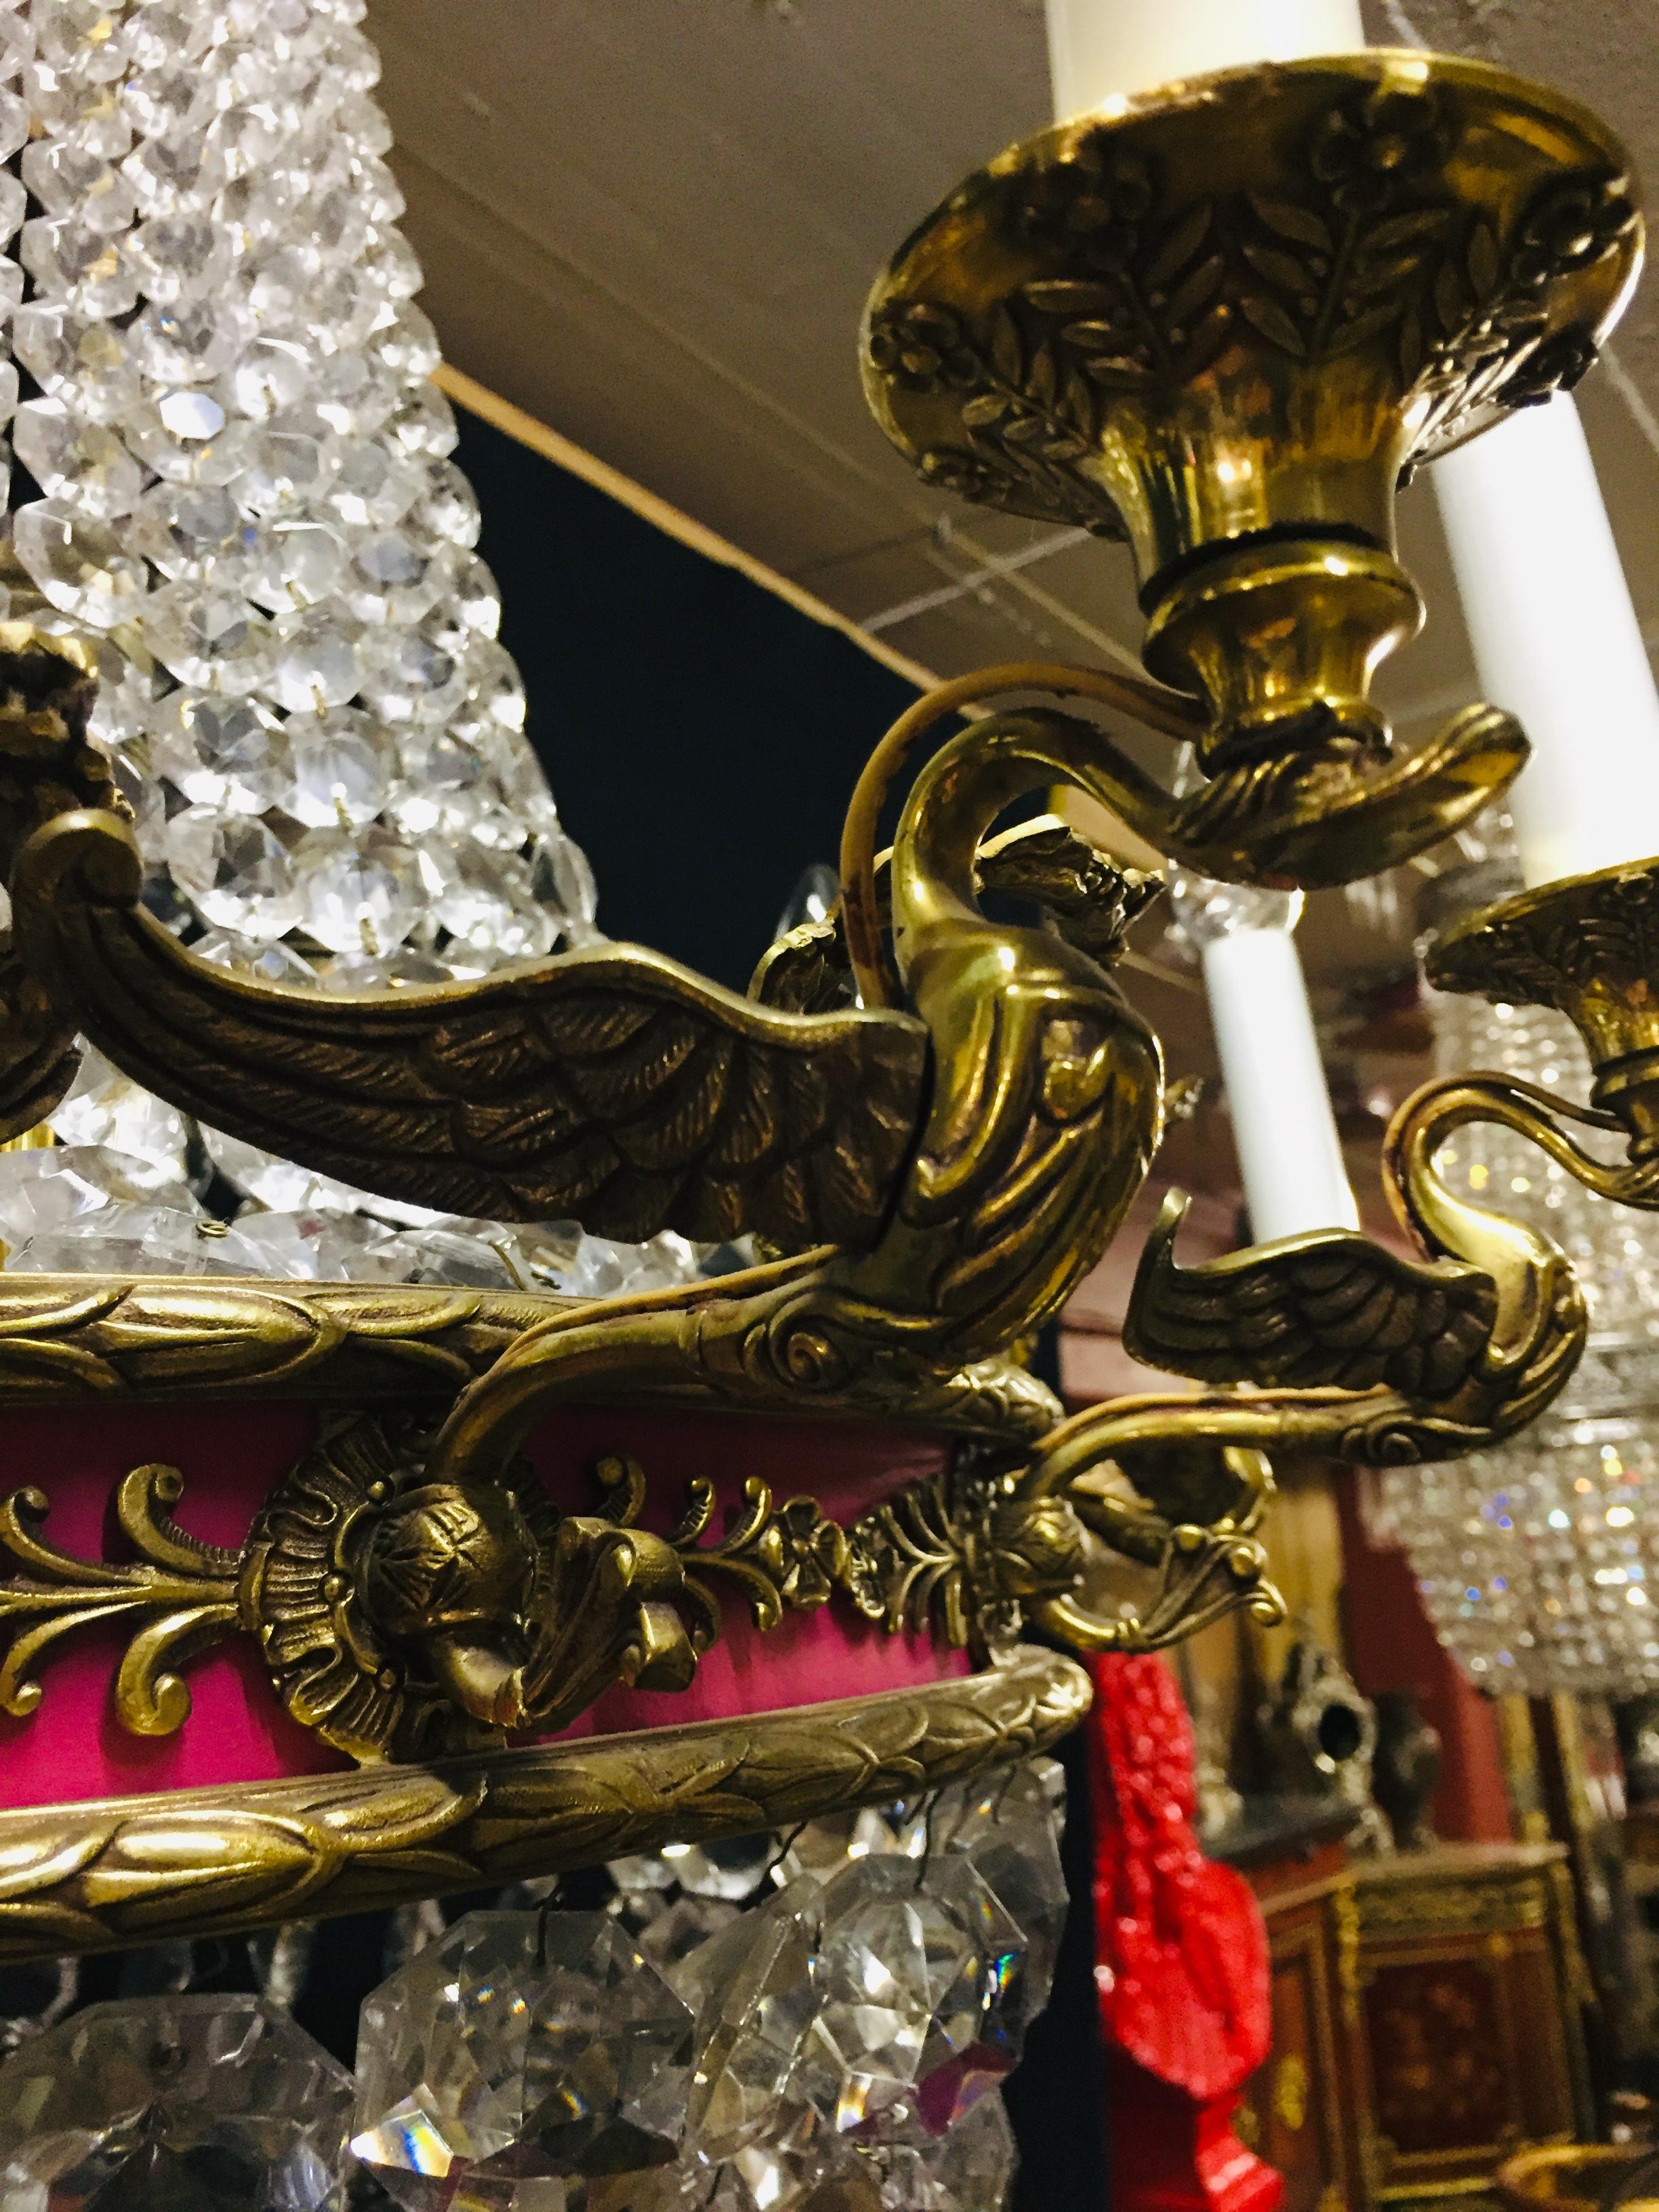 19th Century Empire French Chandelier with 10 Swans Arms